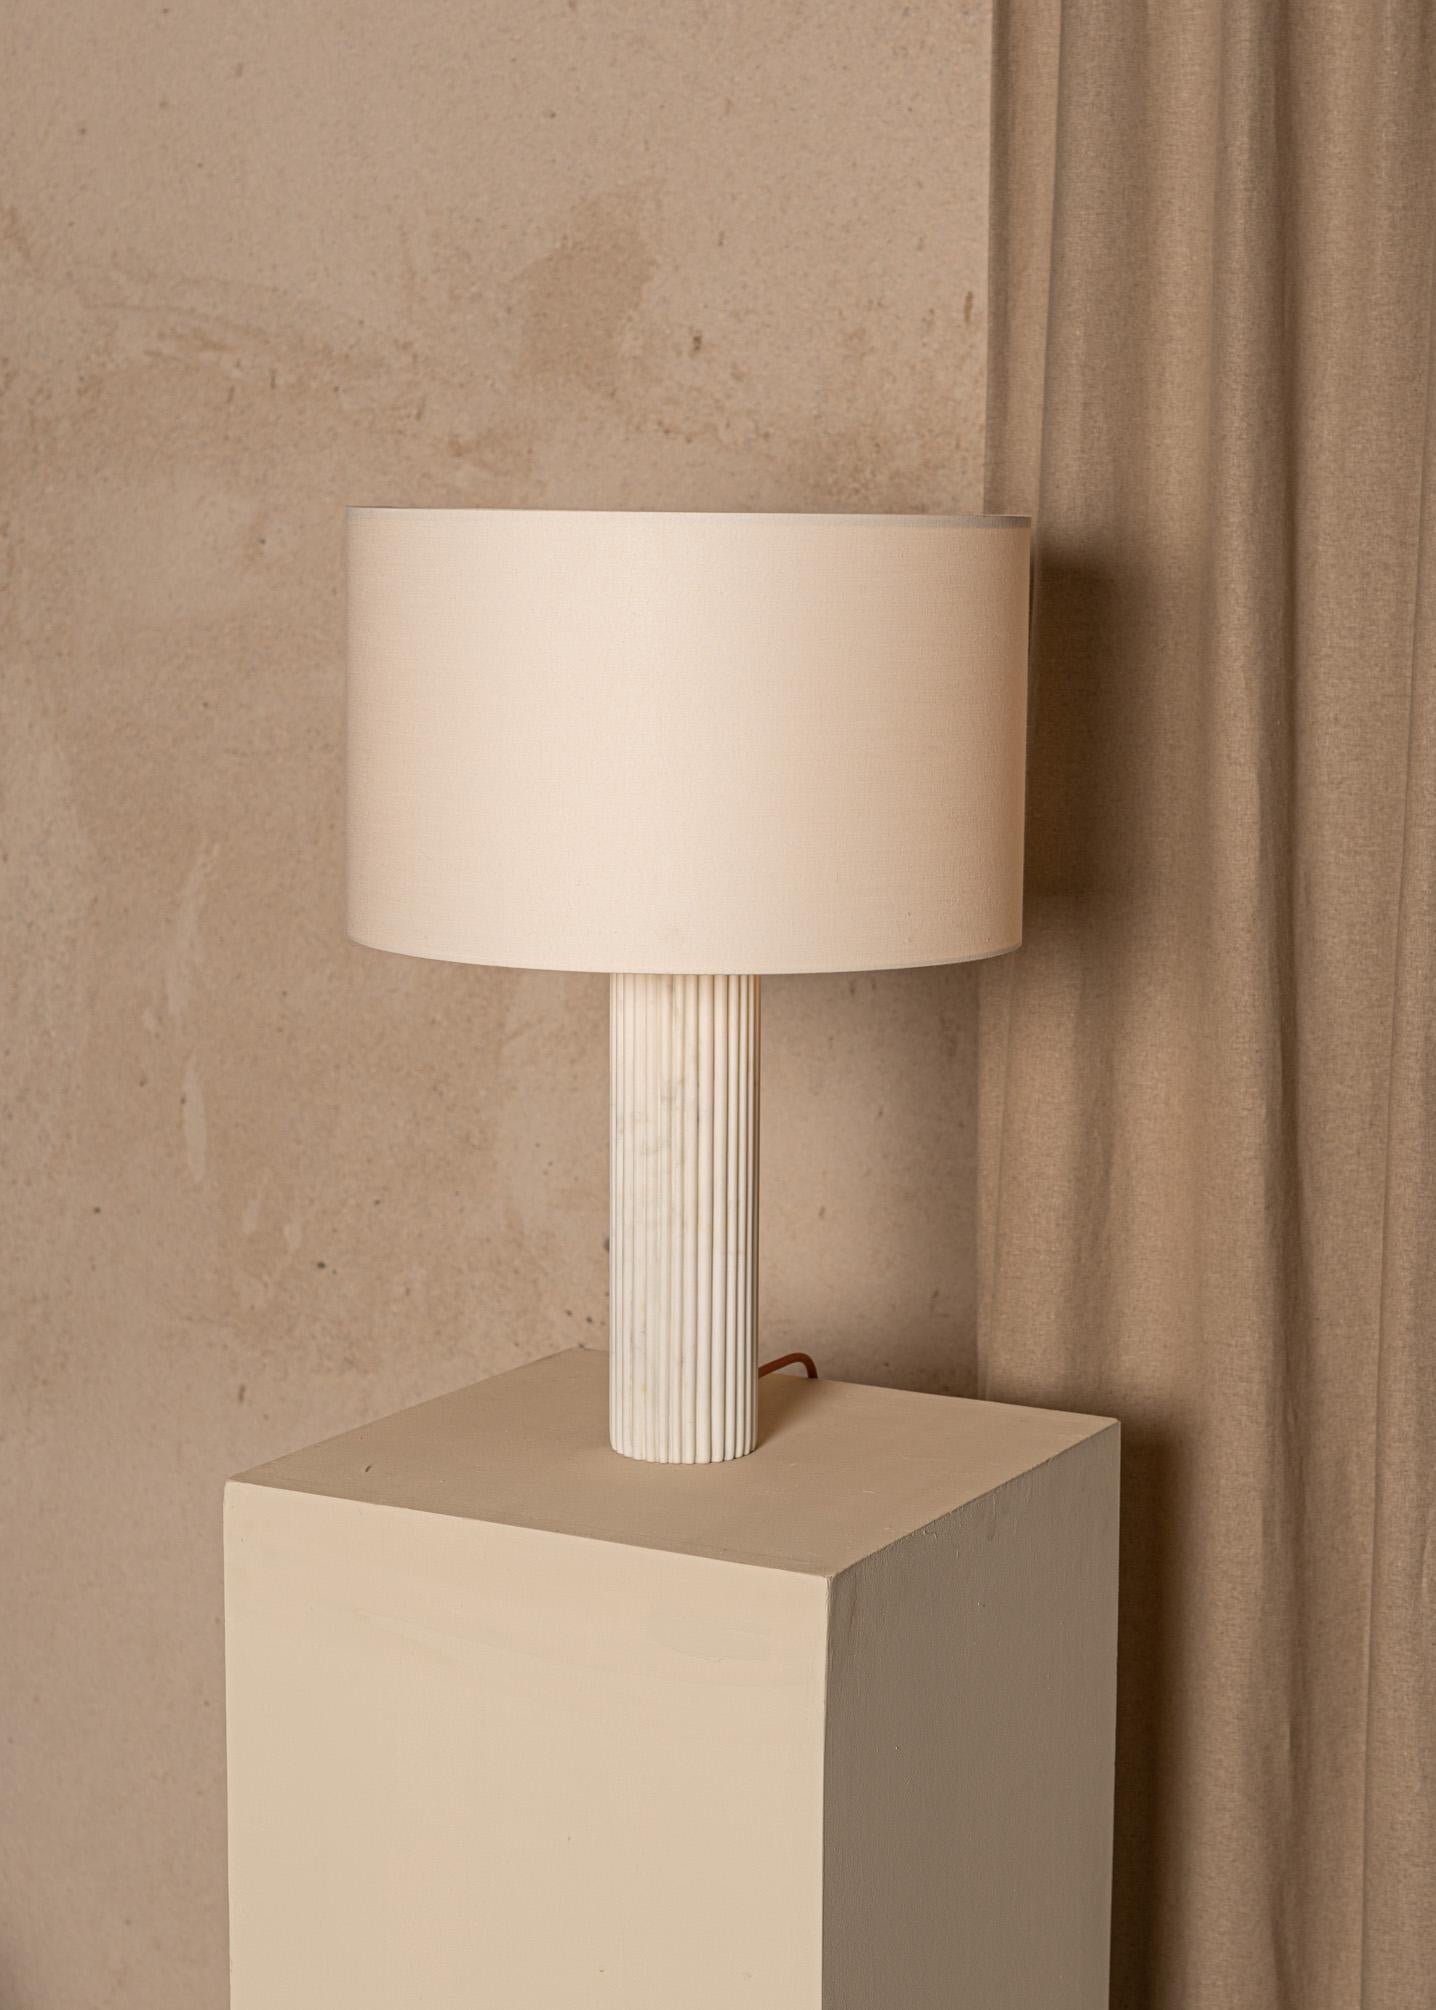 White Marble Fluta Table Lamp by Simone & Marcel
Dimensions: Ø 40 x H 58 cm.
Materials: Cotton and white marble.

Also available in different marble and wood options and finishes. Custom options available on request. Please contact us. 

All our